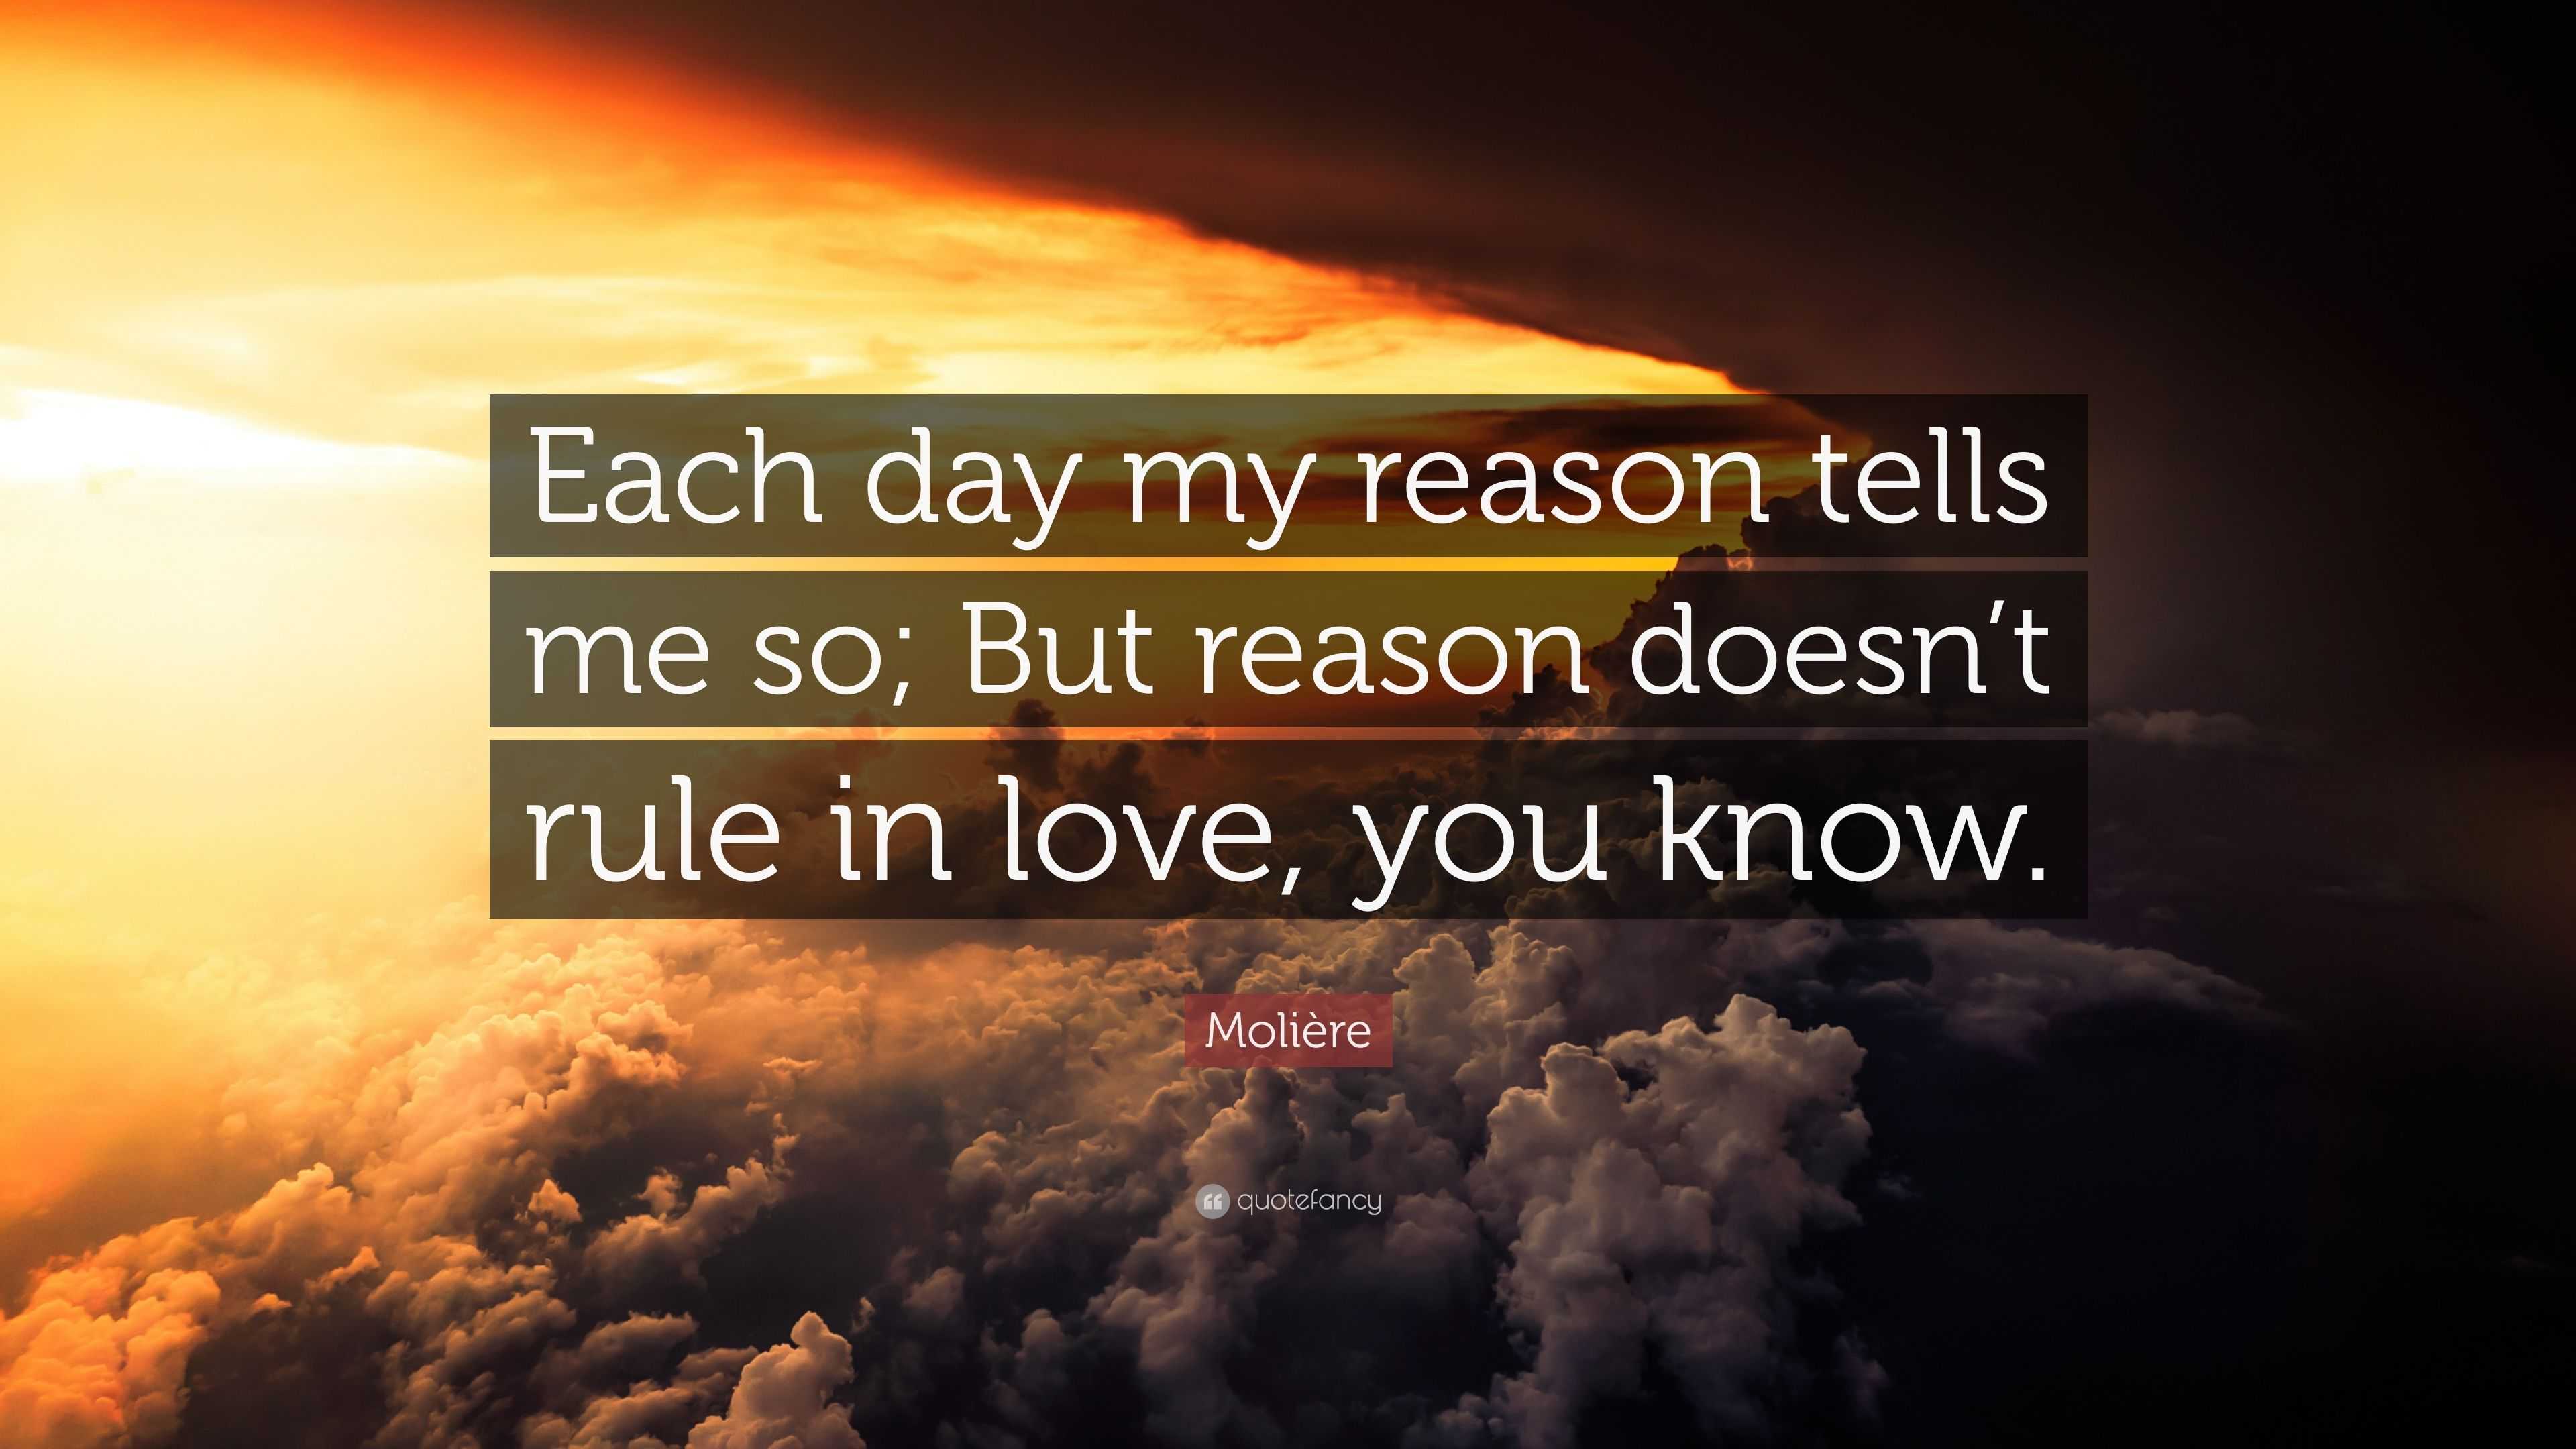 Molière Quote: “Each day my reason tells me so; But reason doesn’t rule ...